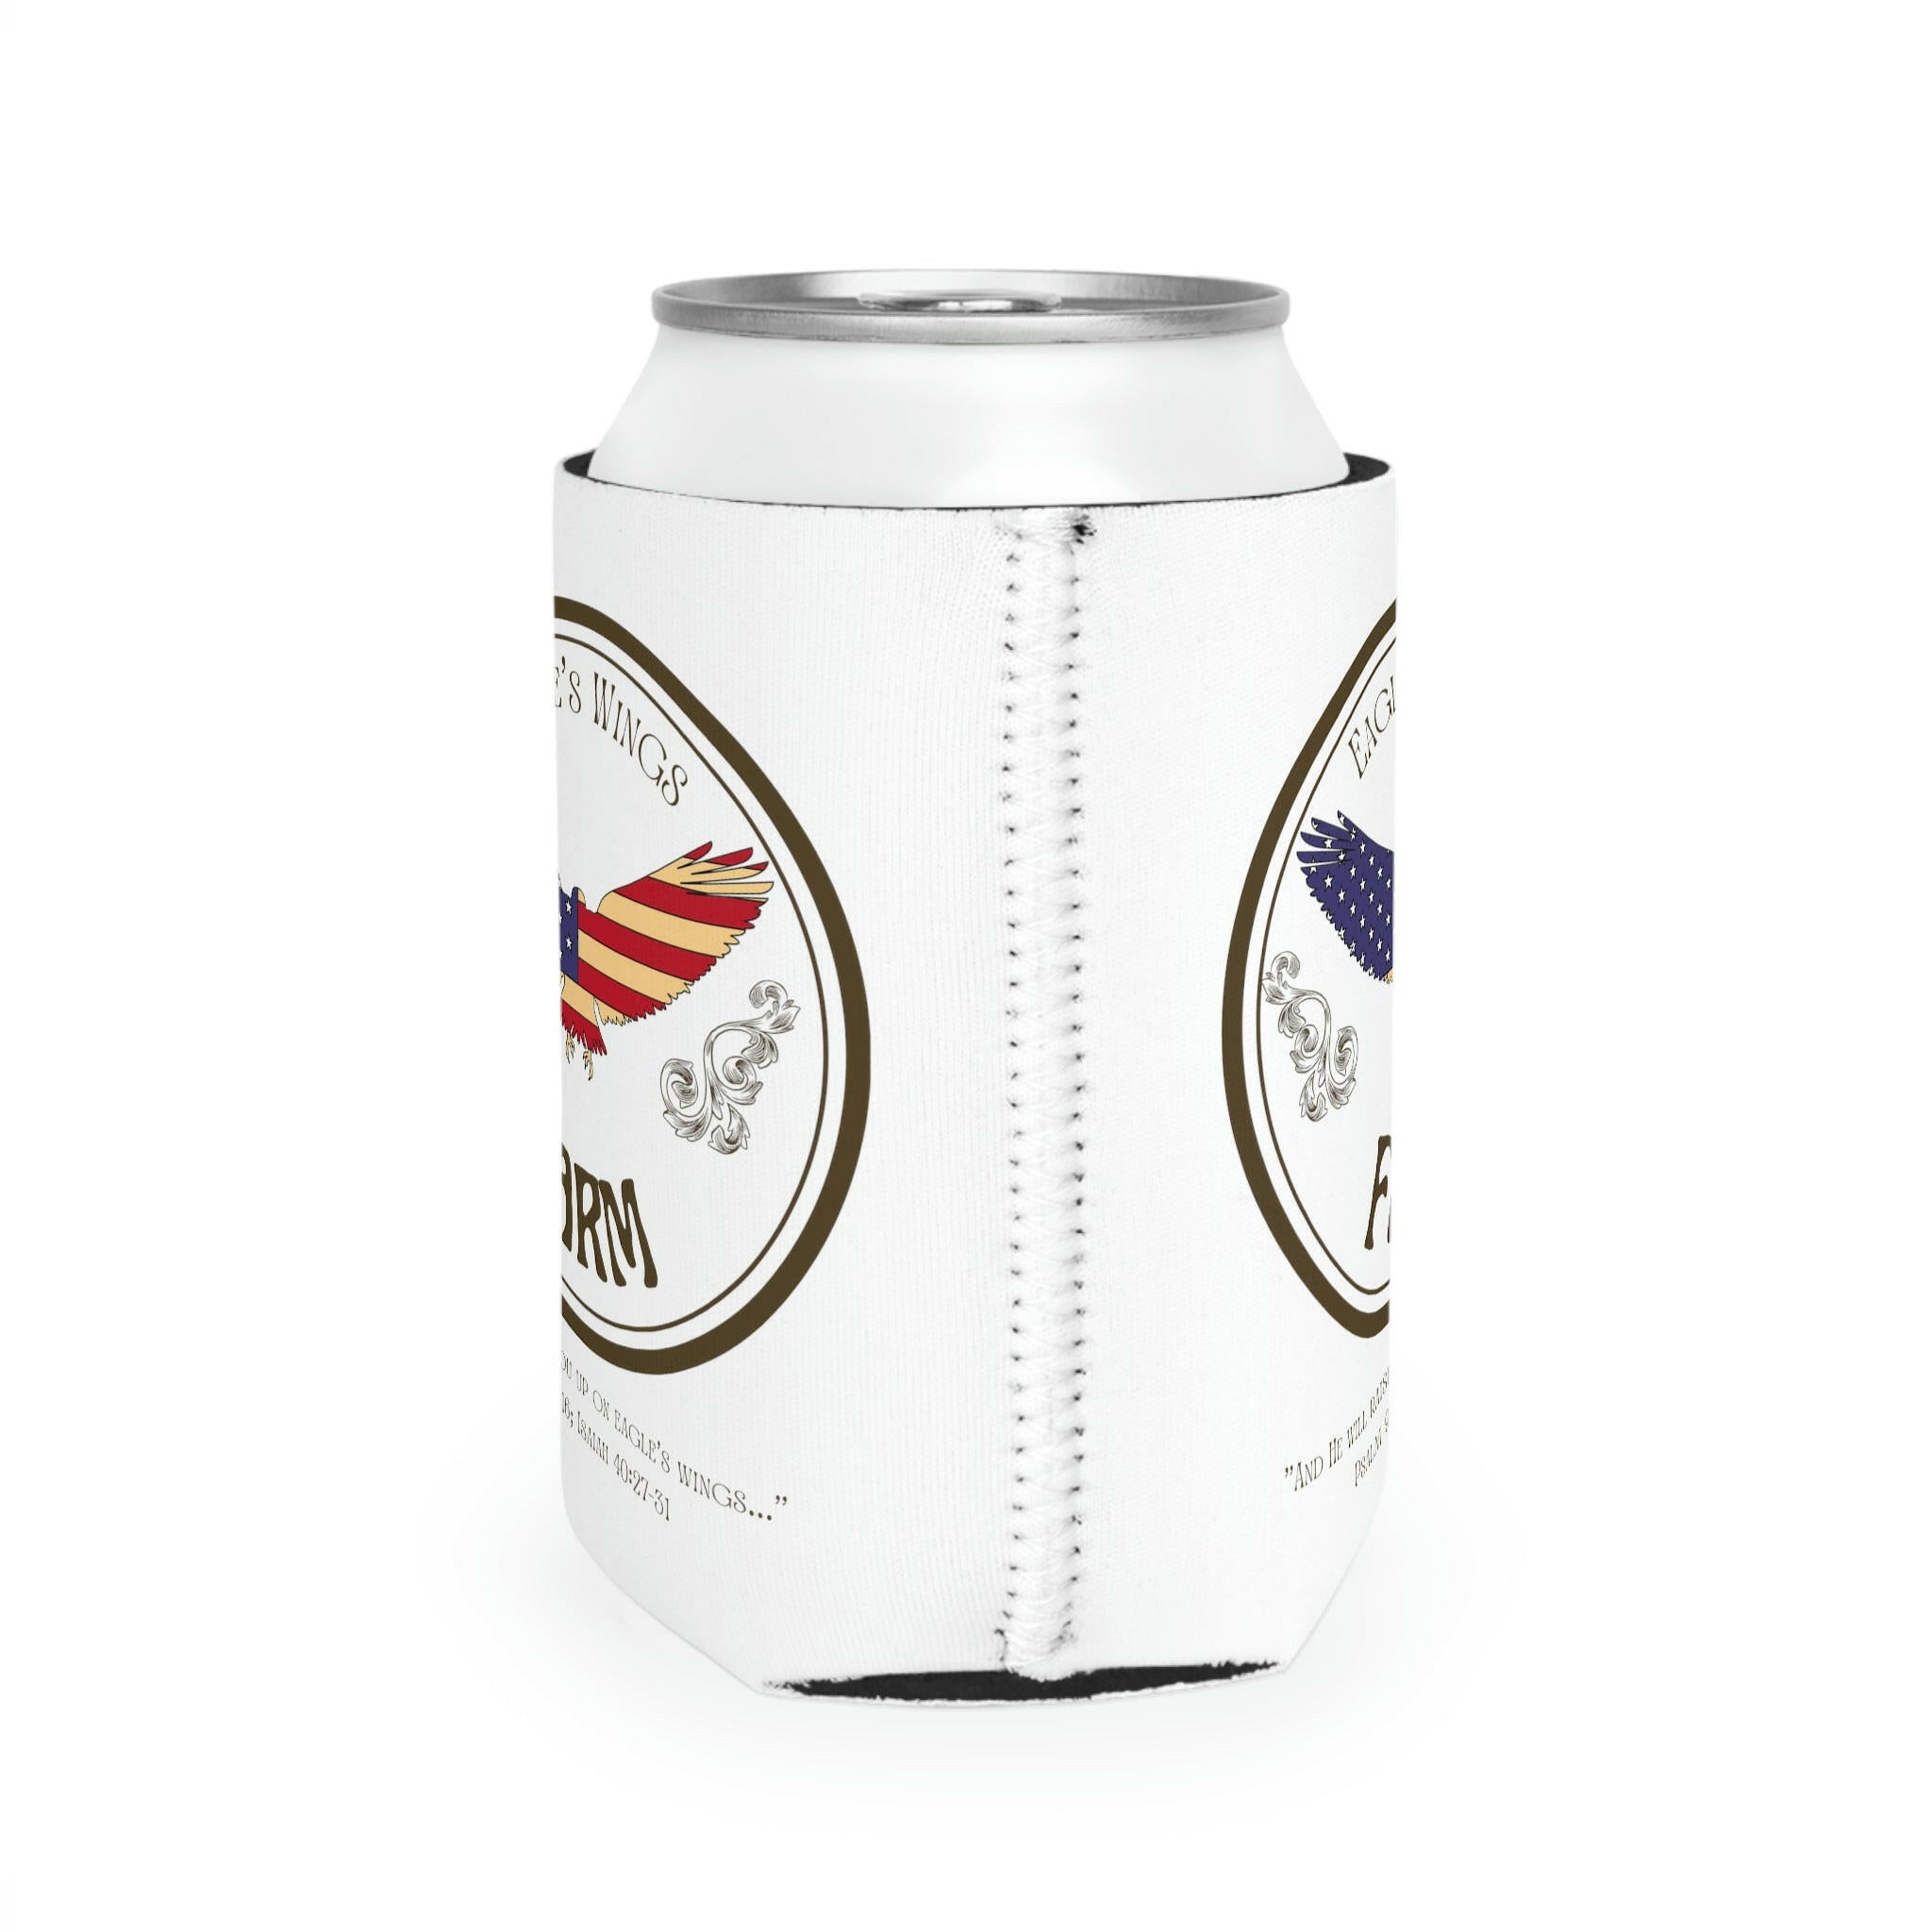 “Eagle's Wings Farm” -Can Cooler Sleeve.